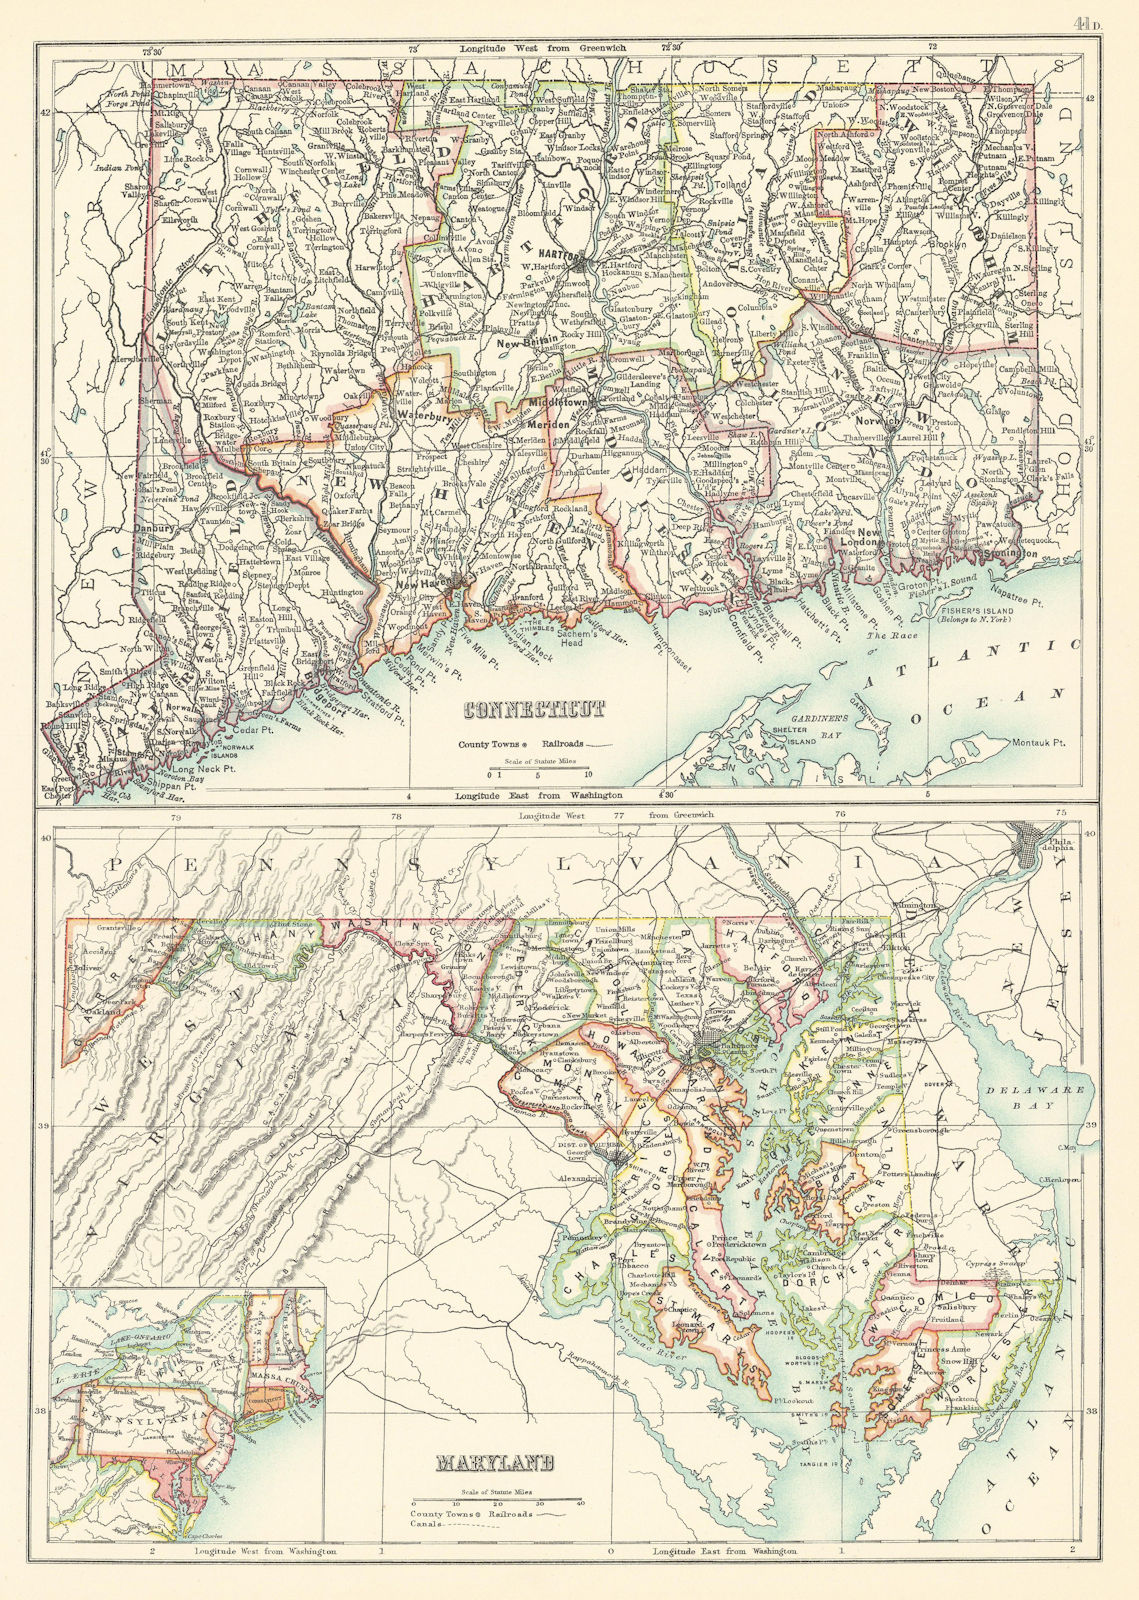 Connecticut and Maryland state maps showing counties. BARTHOLOMEW 1898 old